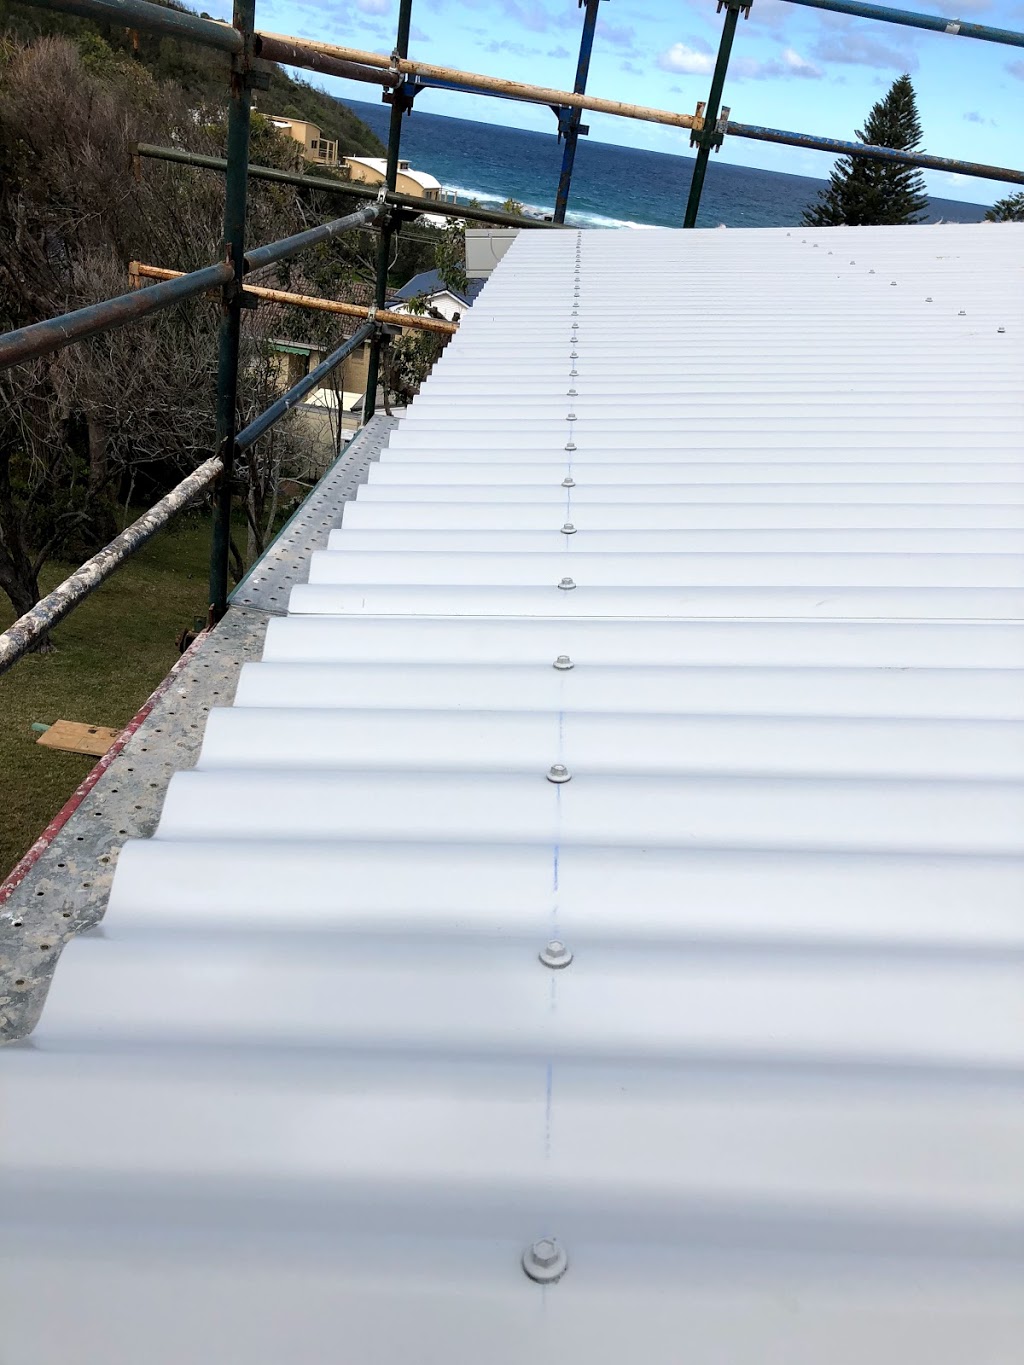 AusStyle Metal Roofing | 4 Putarri Ave, St. Ives NSW 2075, Australia | Phone: 0412 481 993